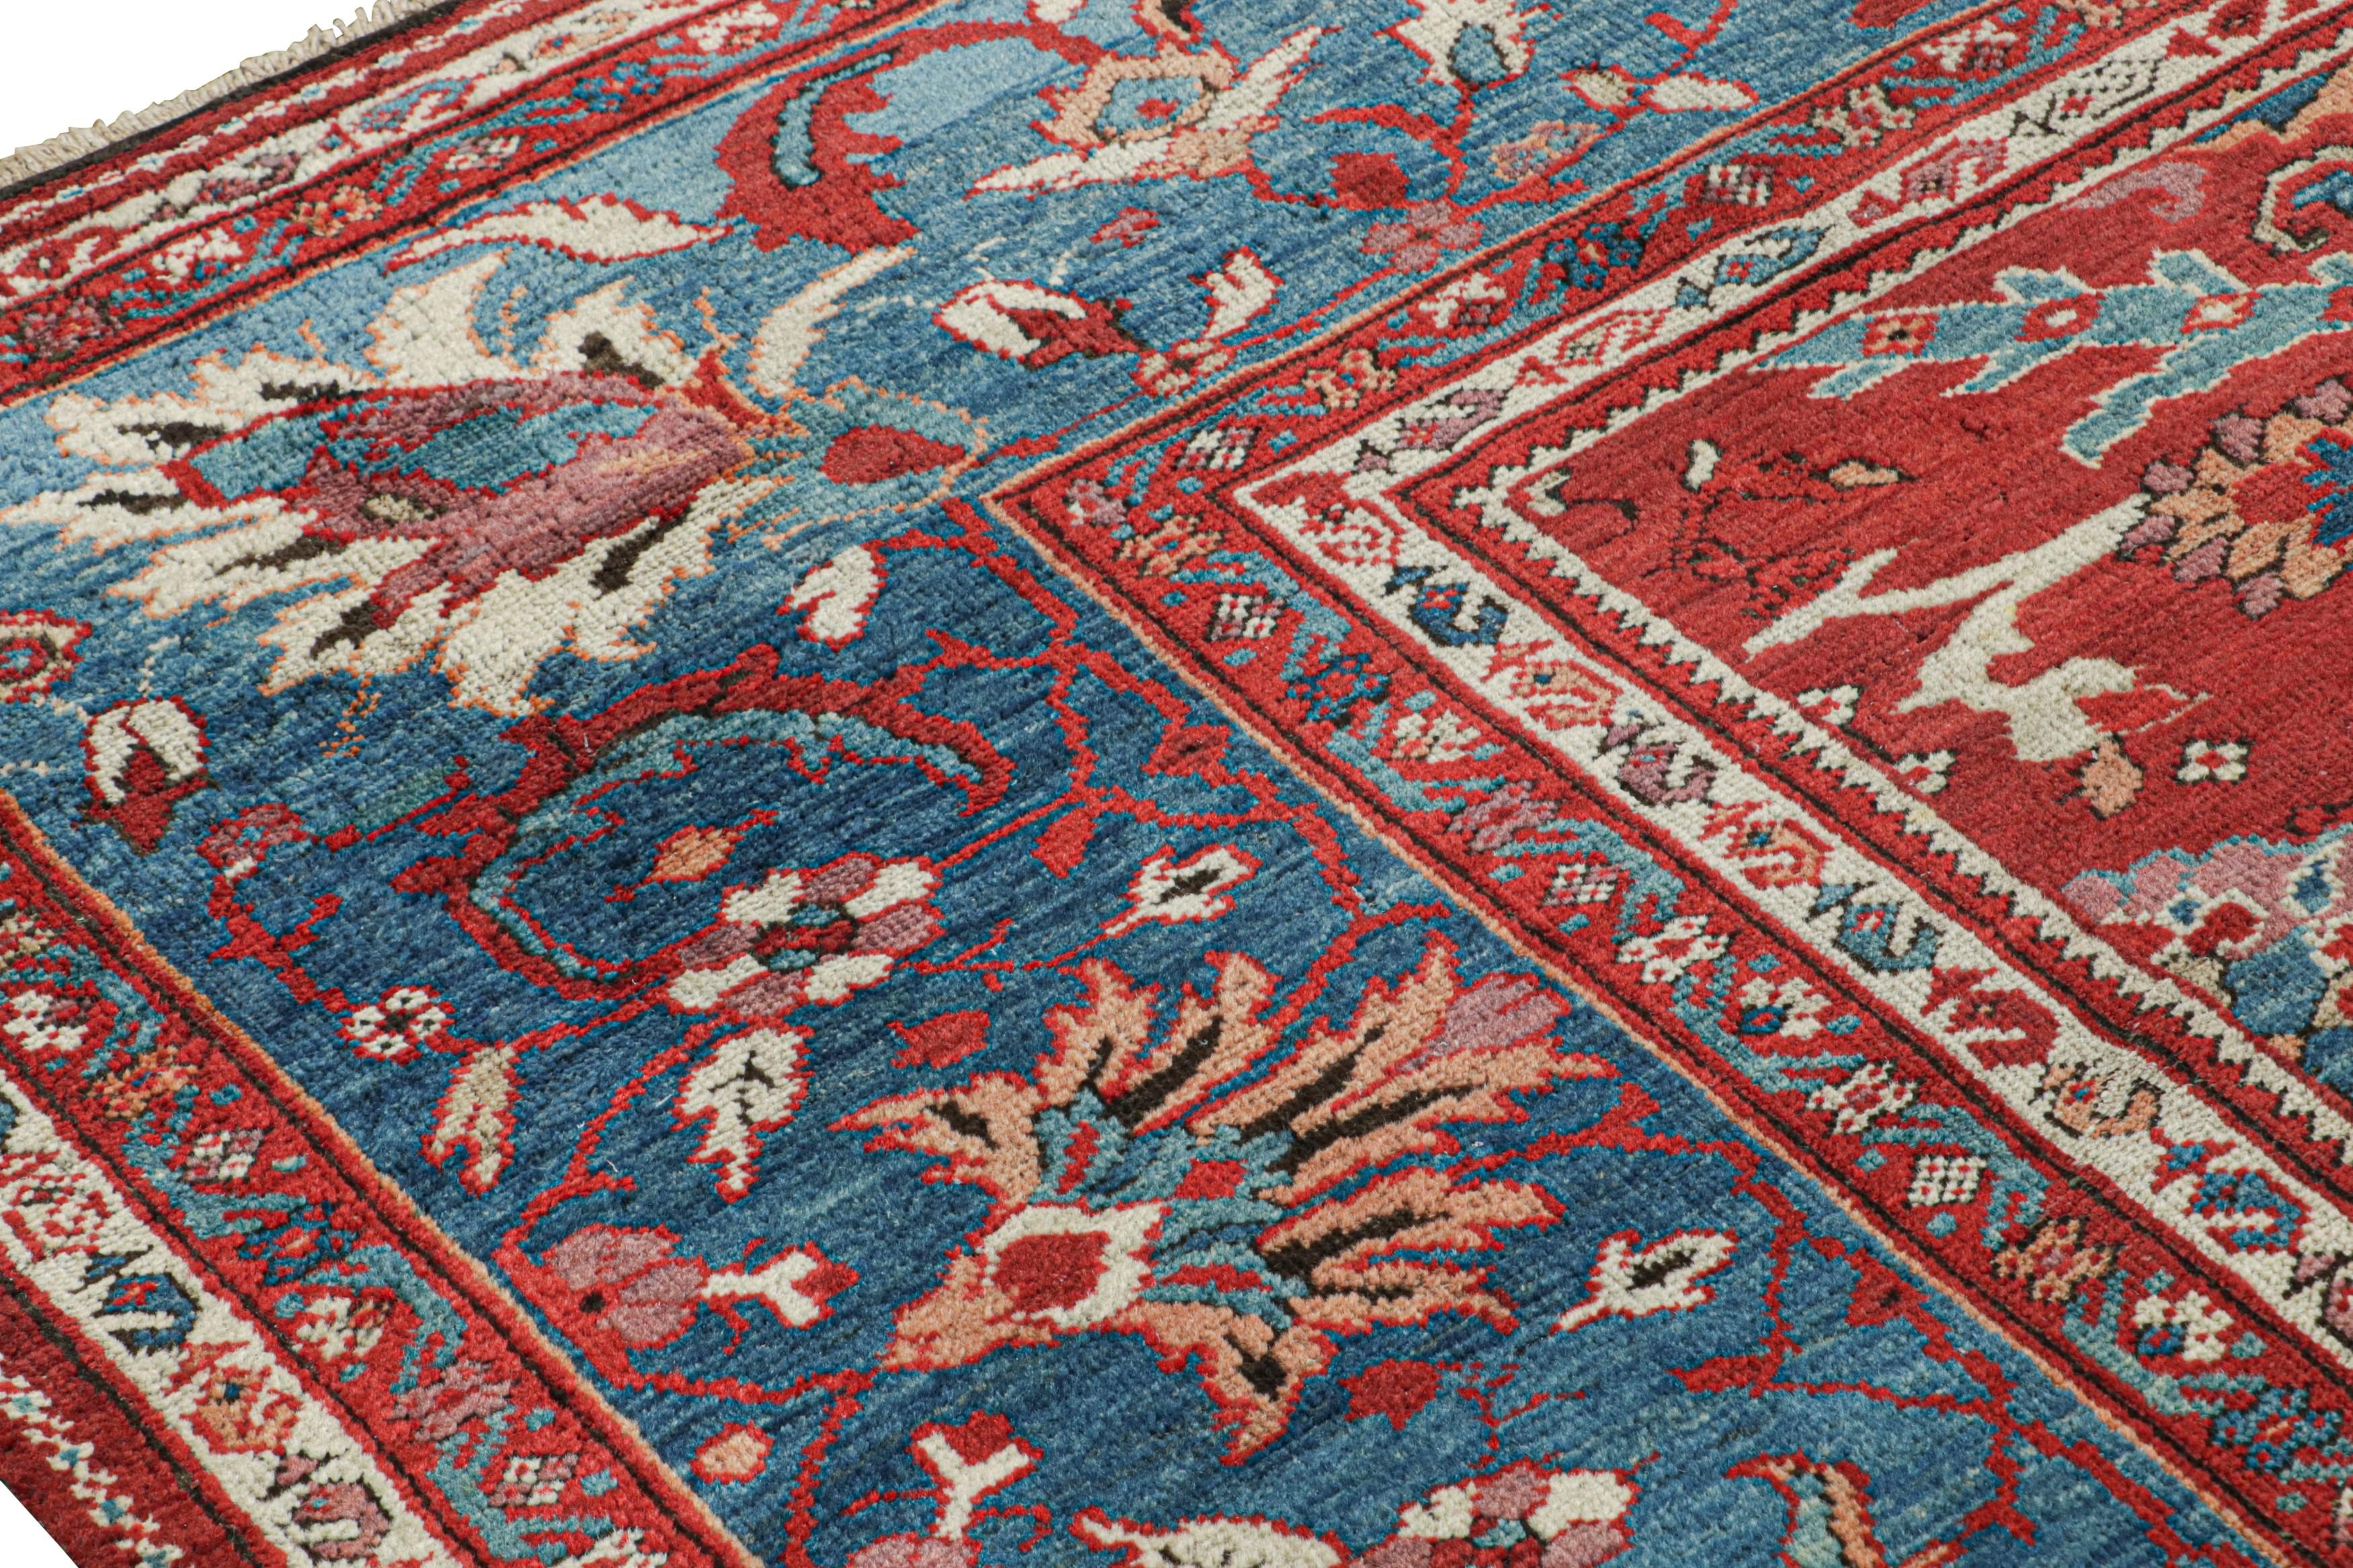 Early 20th Century Antique Persian Sultanabad Rug with Red-Blue Floral Patterns, from Rug & Kilim For Sale